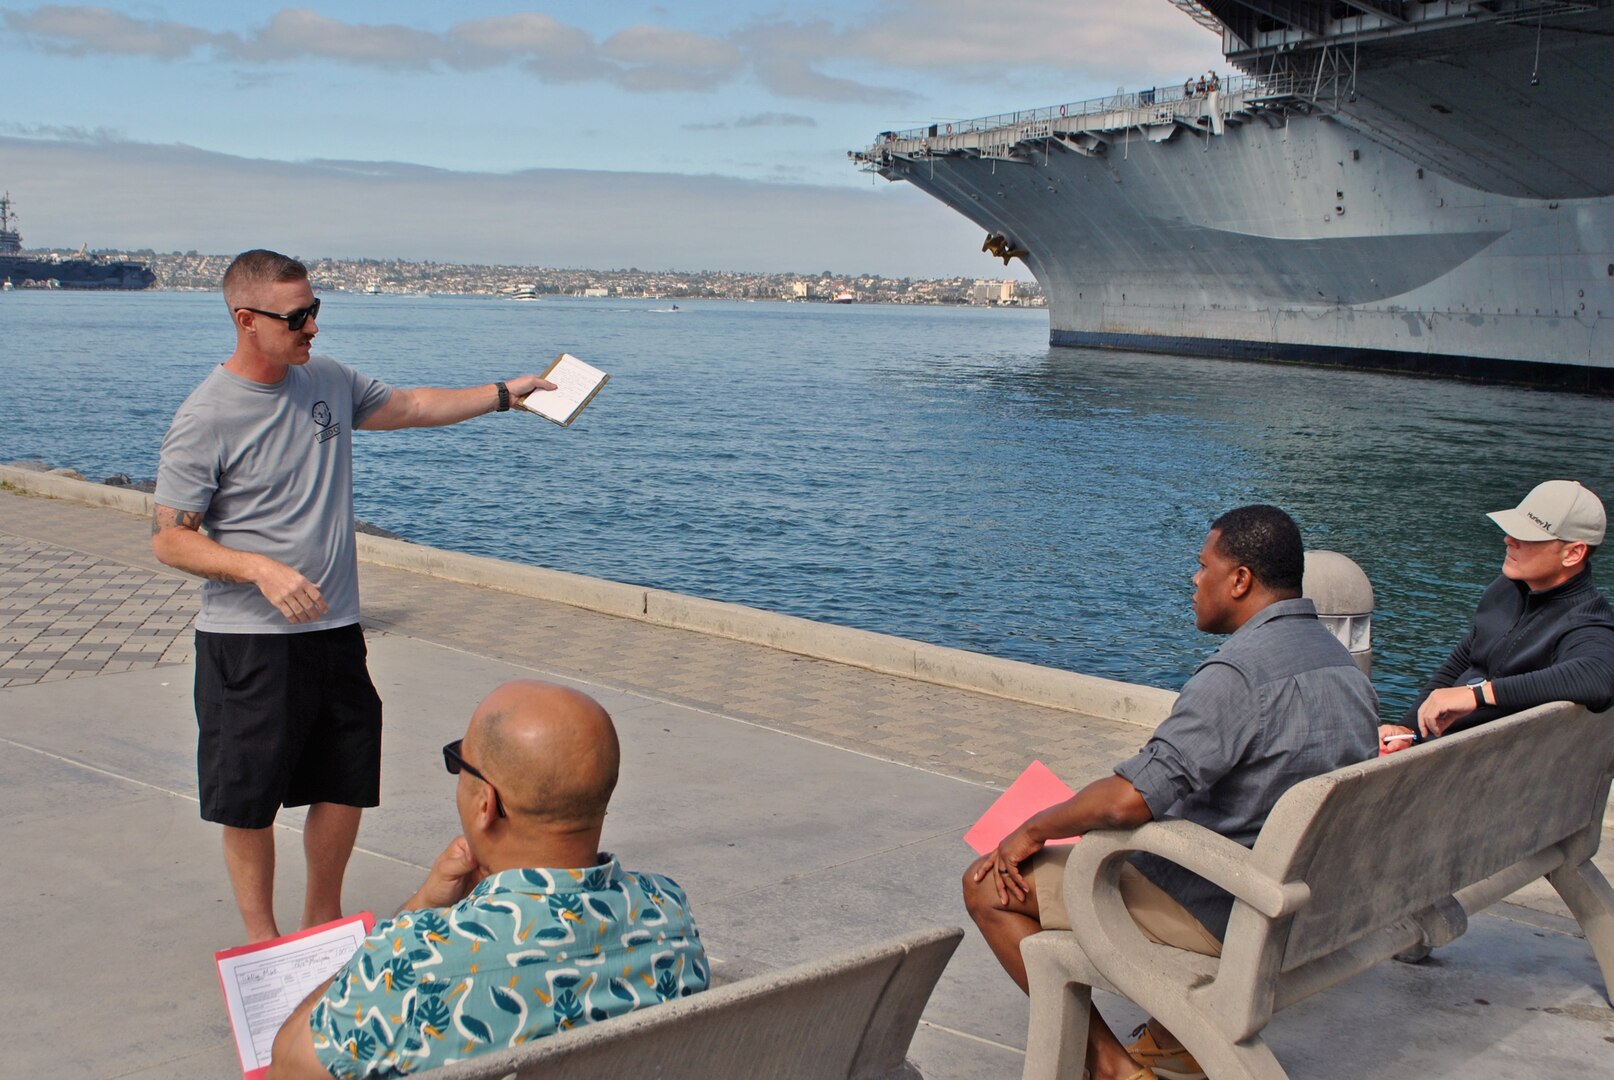 Air Force Senior Master Sgt. Mark Welling (Montgomery MEPS) gives an oral presentation on the USS Midway in San Diego. The oral presentation was one of the various challenges for competitors in the USMEPCOM Military Members of the Year competition.